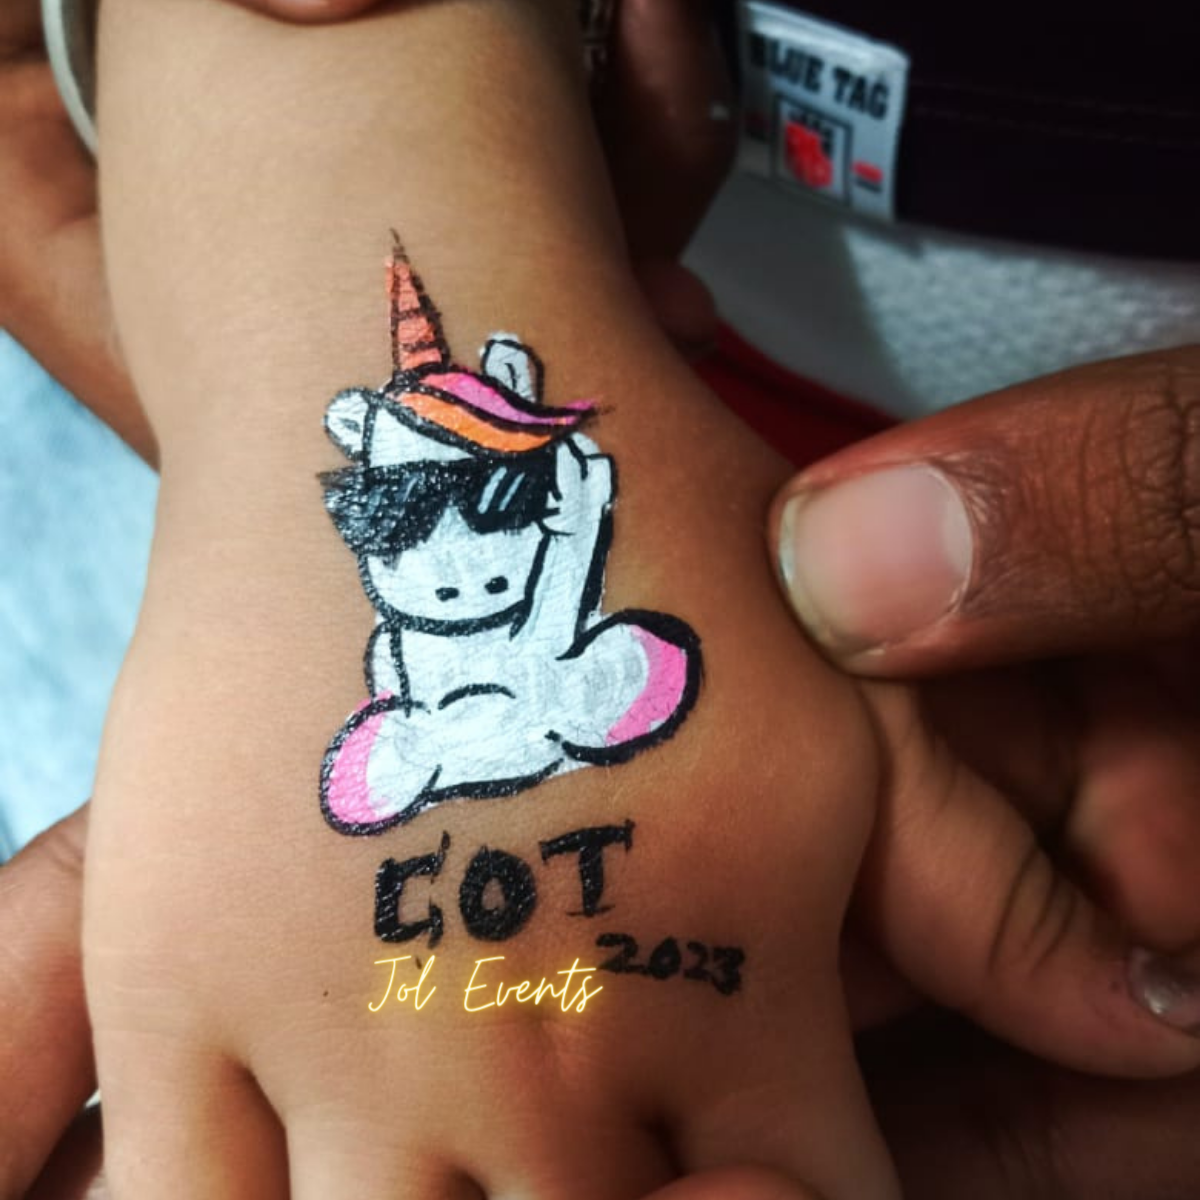 What Are the Best Tattoos for Birthday? | by Aries Tattoos | Medium